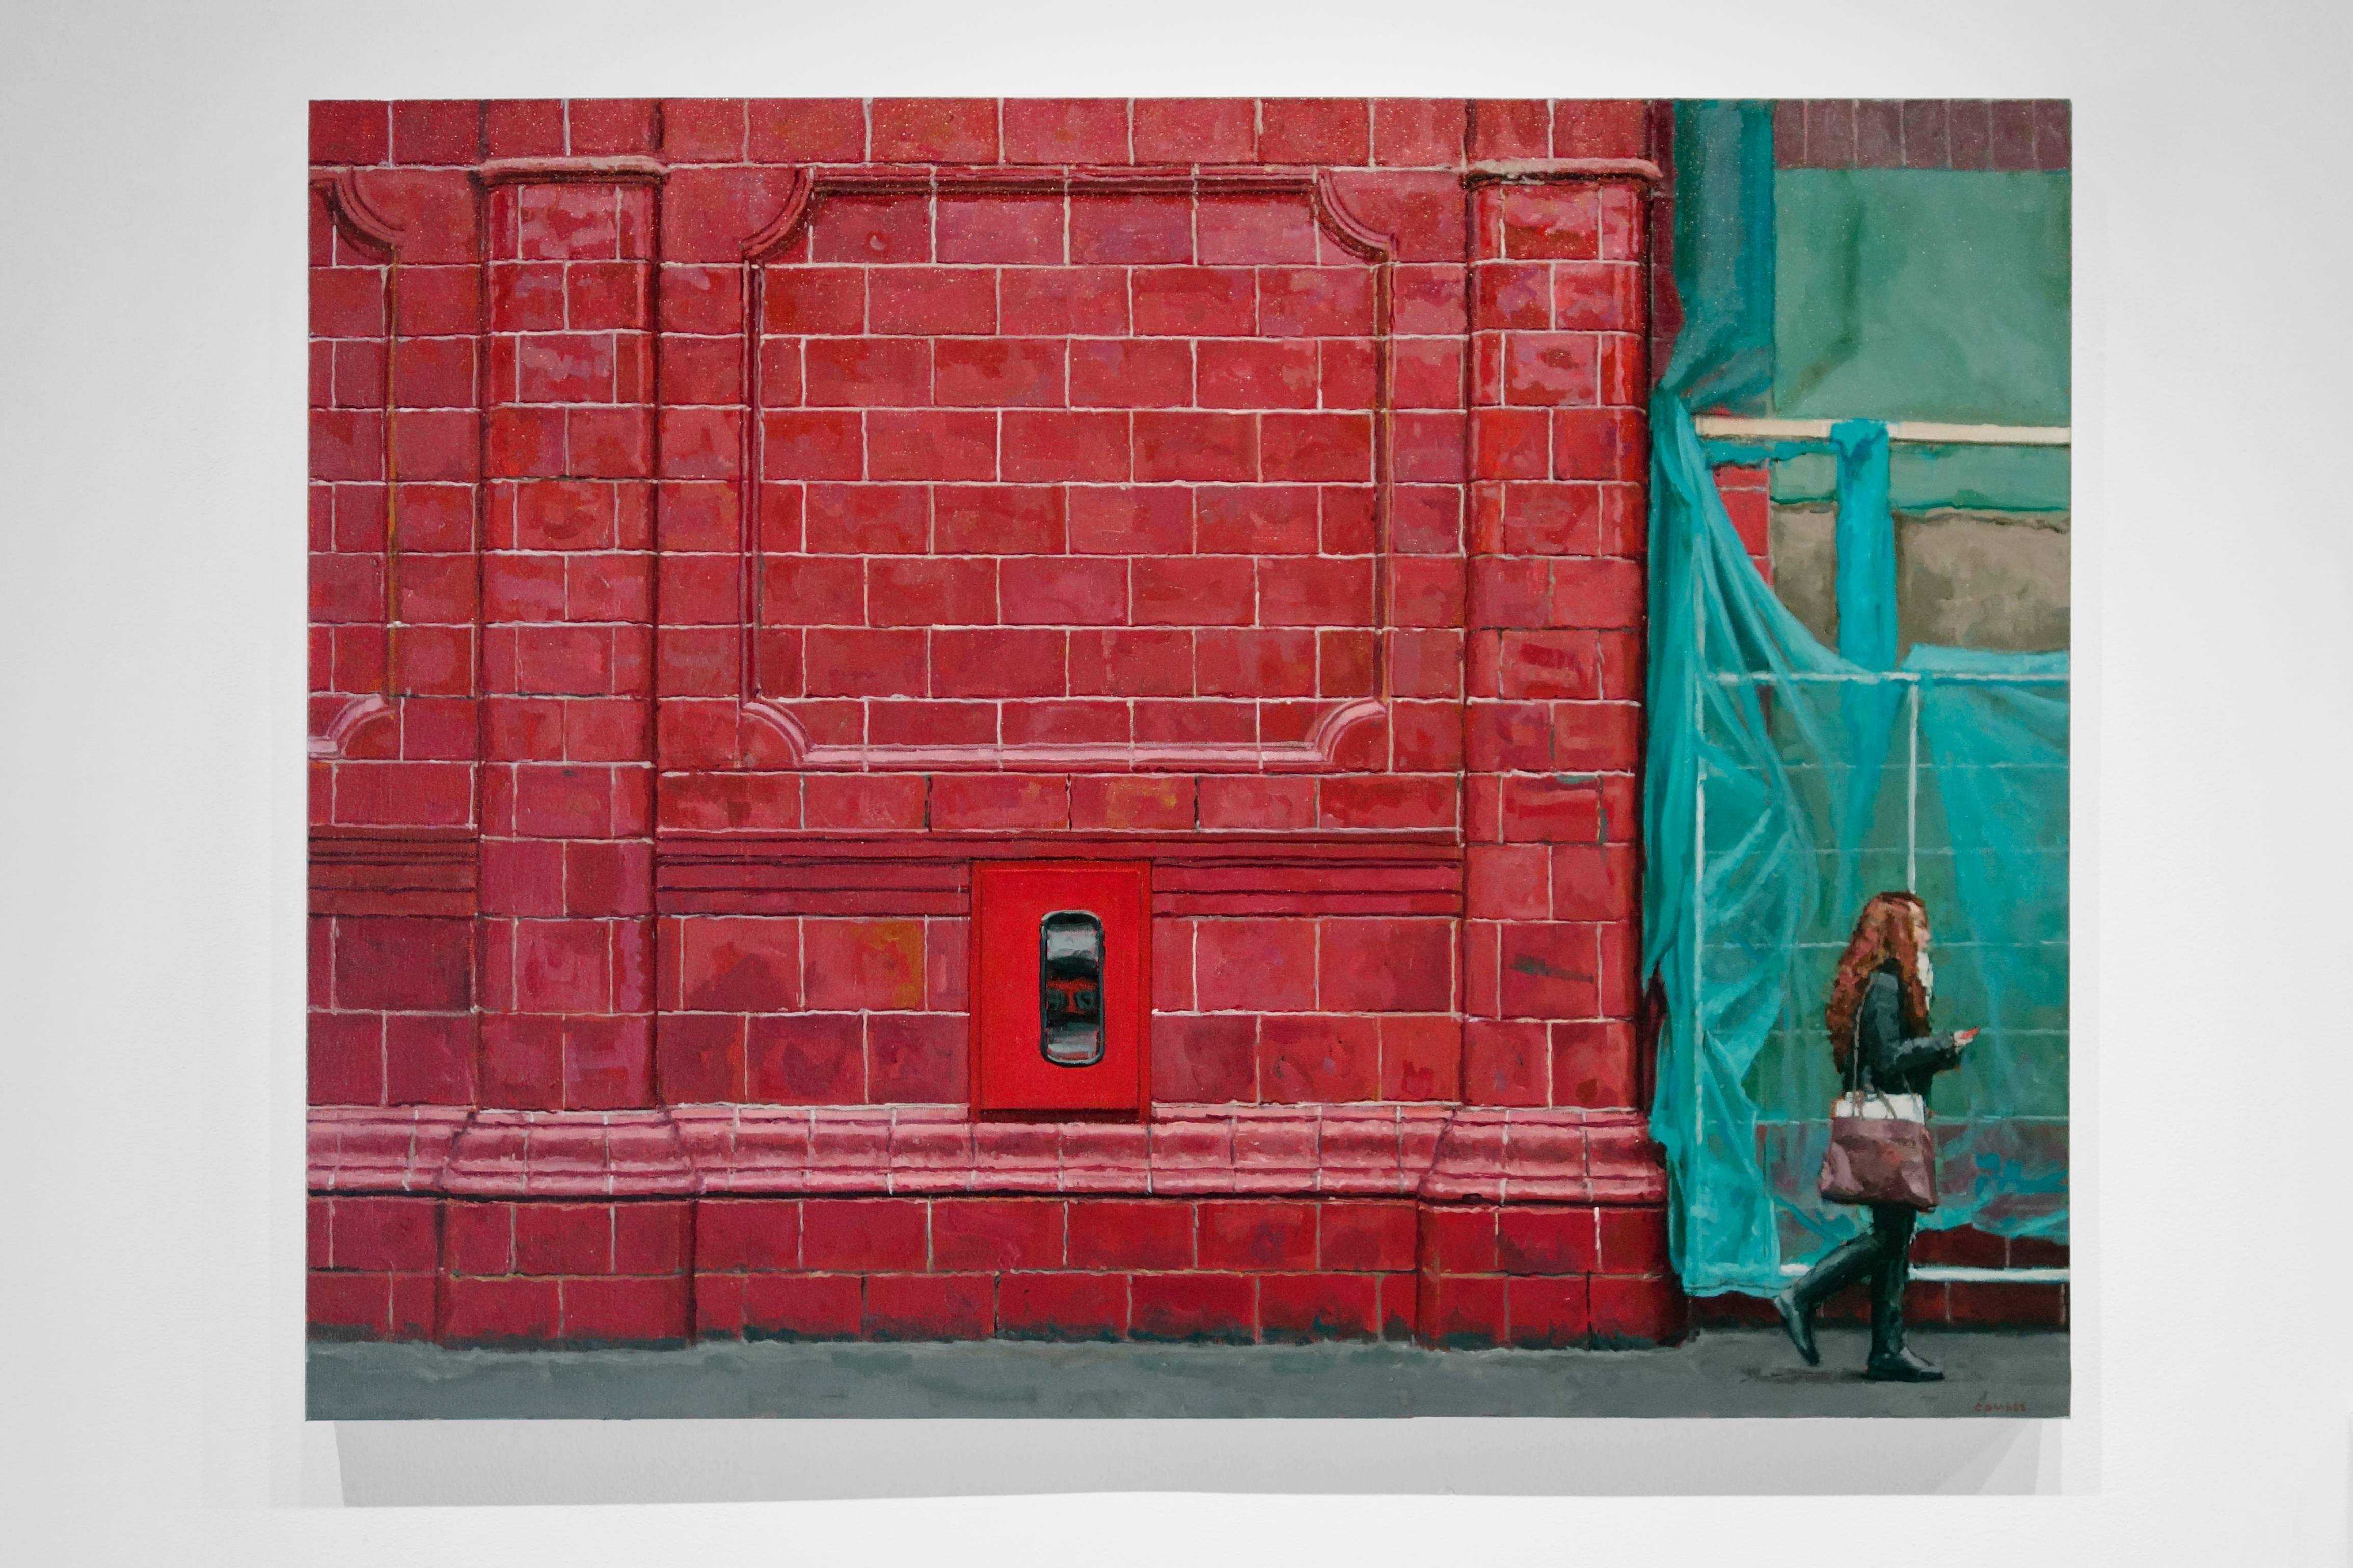 TERRACOTTA WALL, photo-realistic, bright red wall, green, women on the street - Painting by Richard Combes